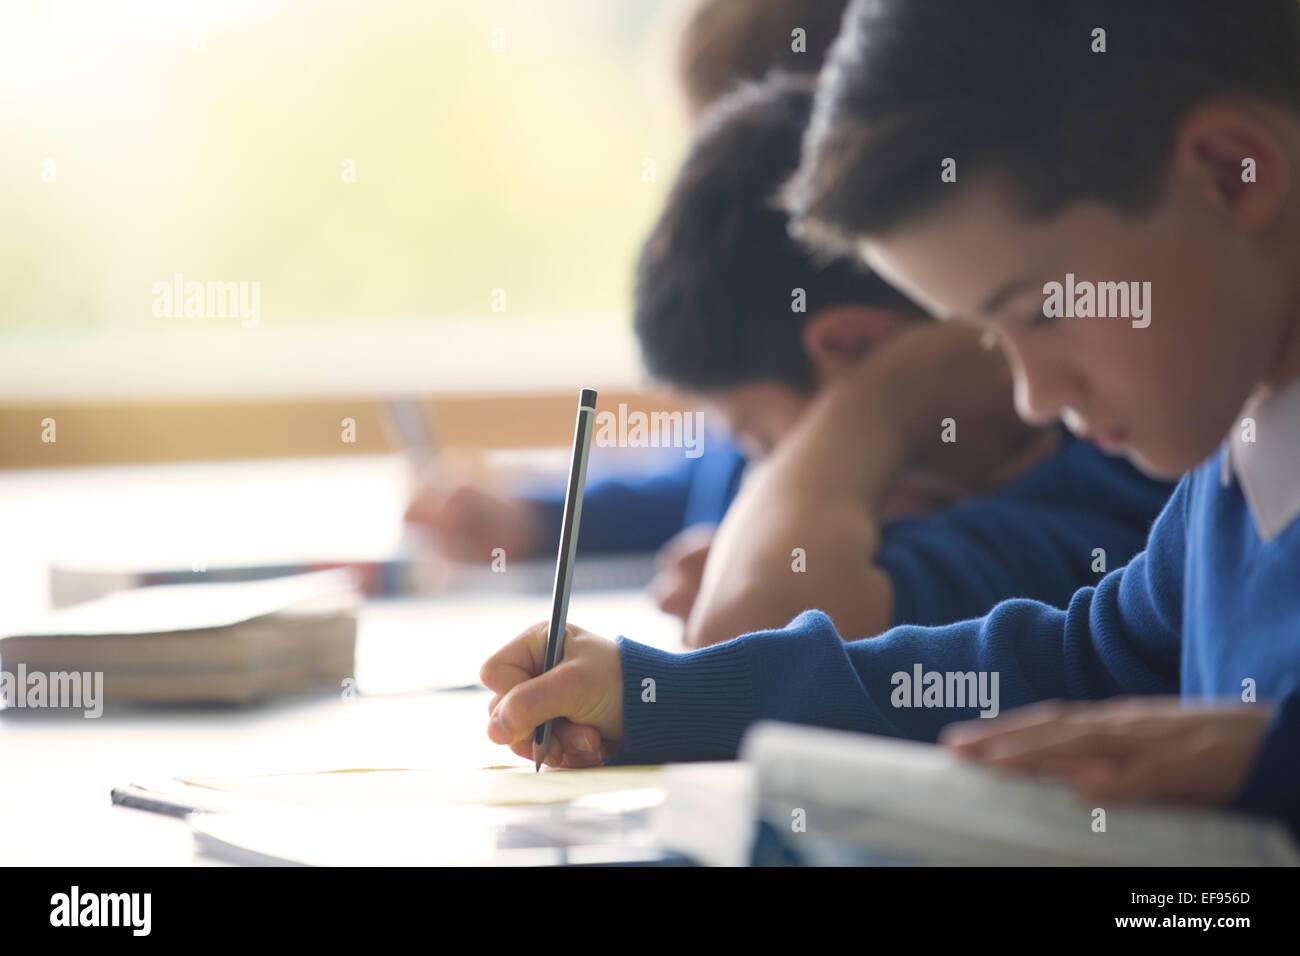 Schoolboys writing in notebook at desk in classroom Stock Photo